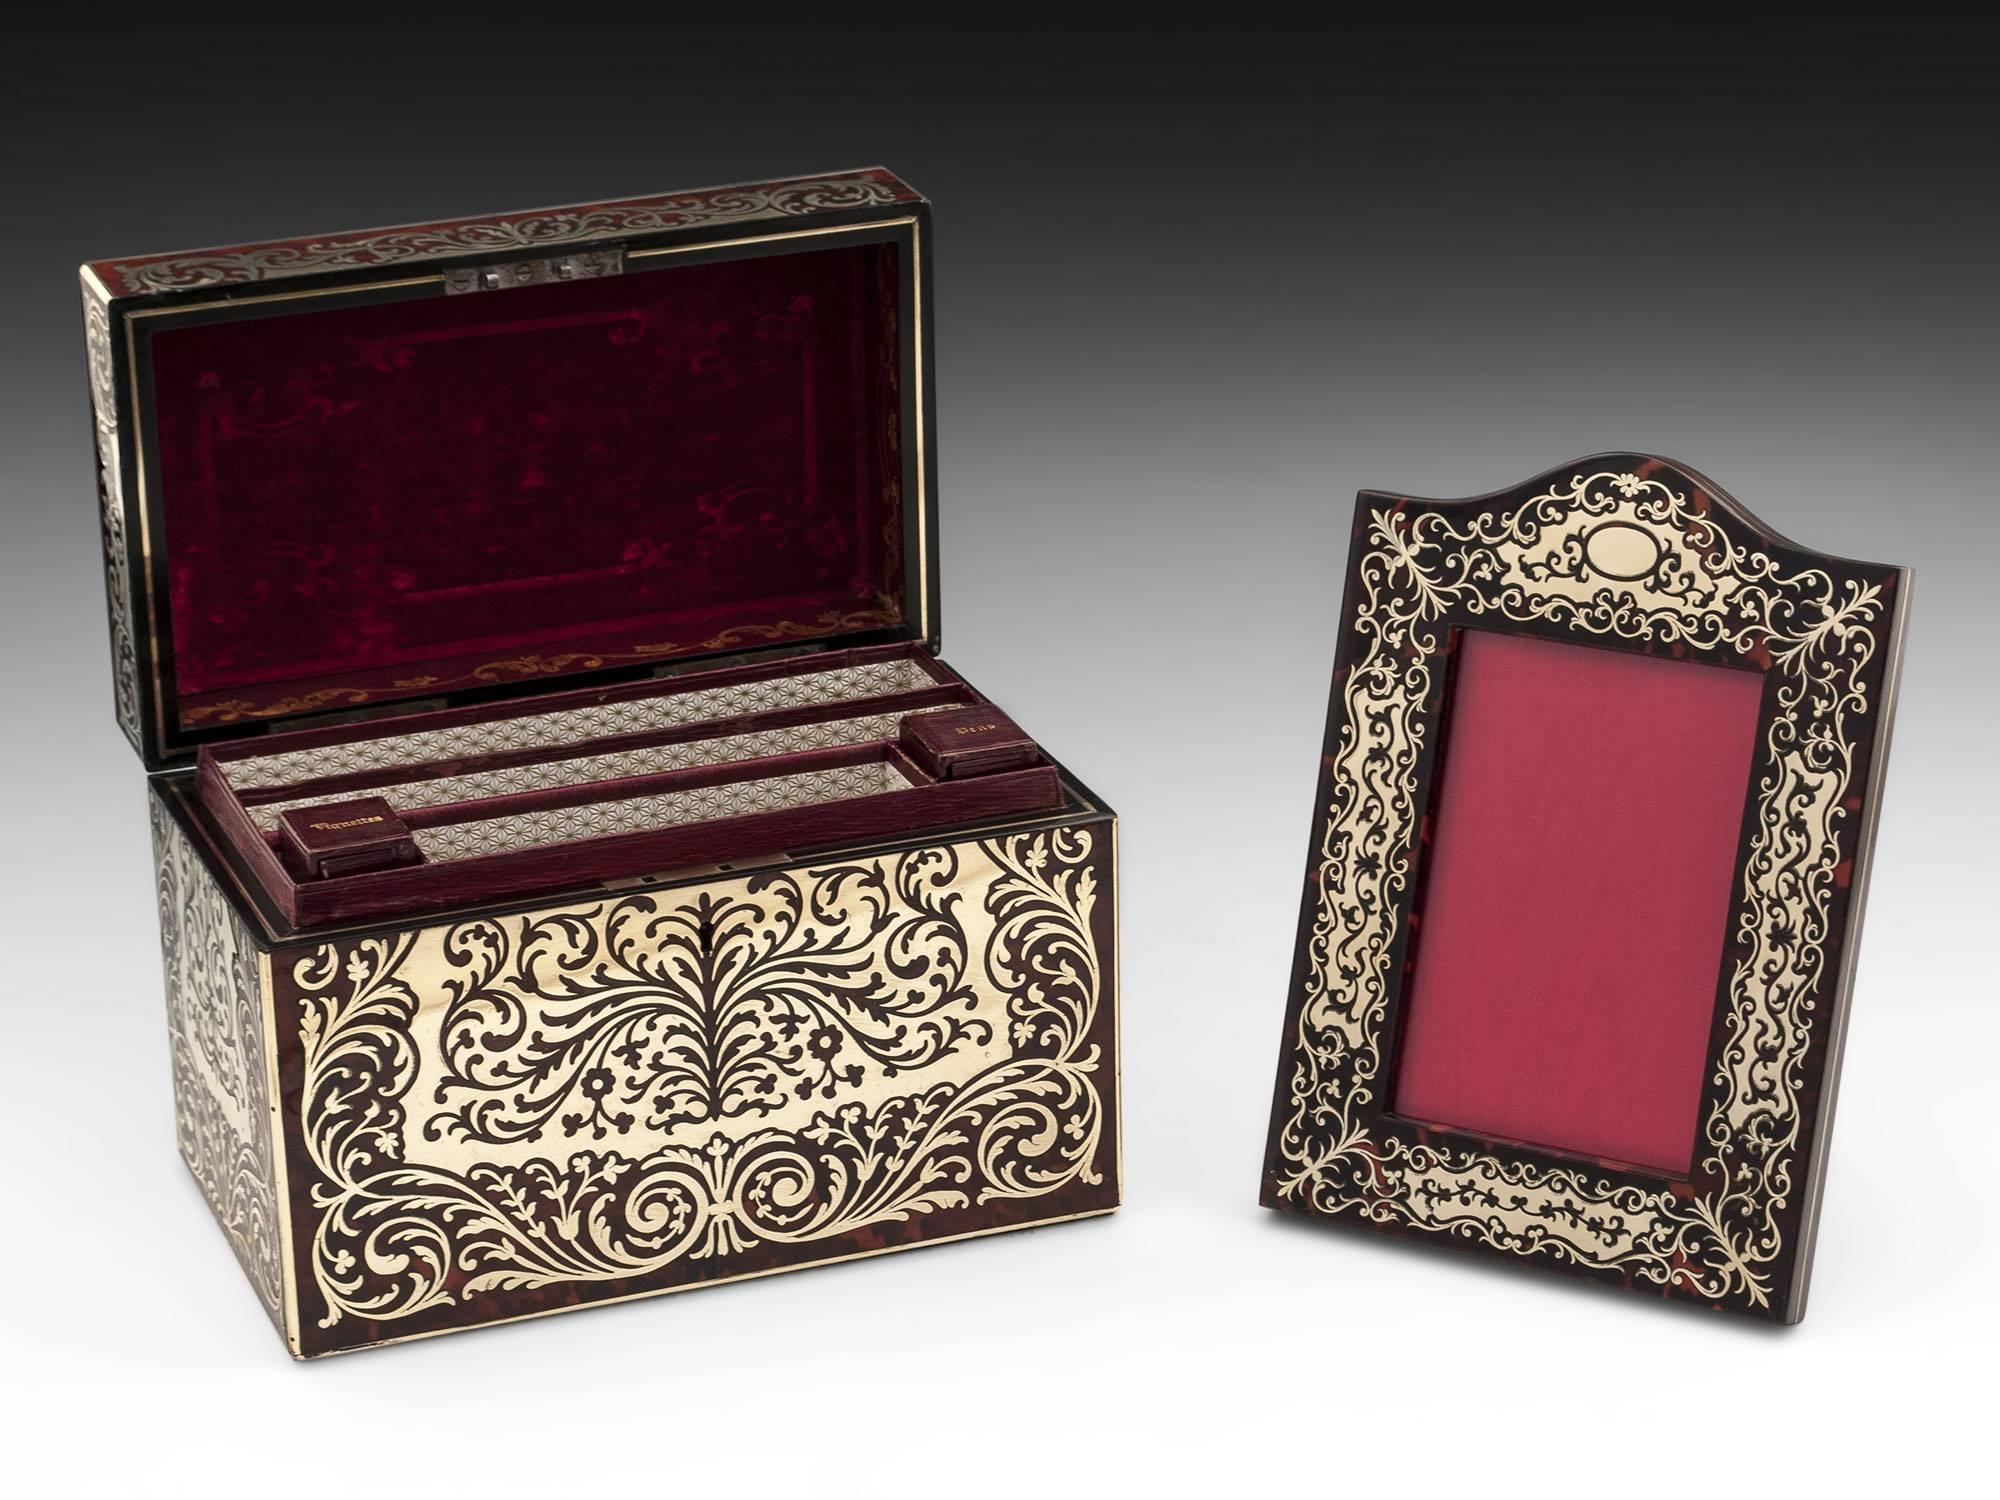 Tortoiseshell boulle desk set by Halstaff & Hannaford comprising a letter box and picture frame. The letter box has three compartments one bearing the label Halstaff & Hannaford, each lined with decorative paper and leather edges. While the